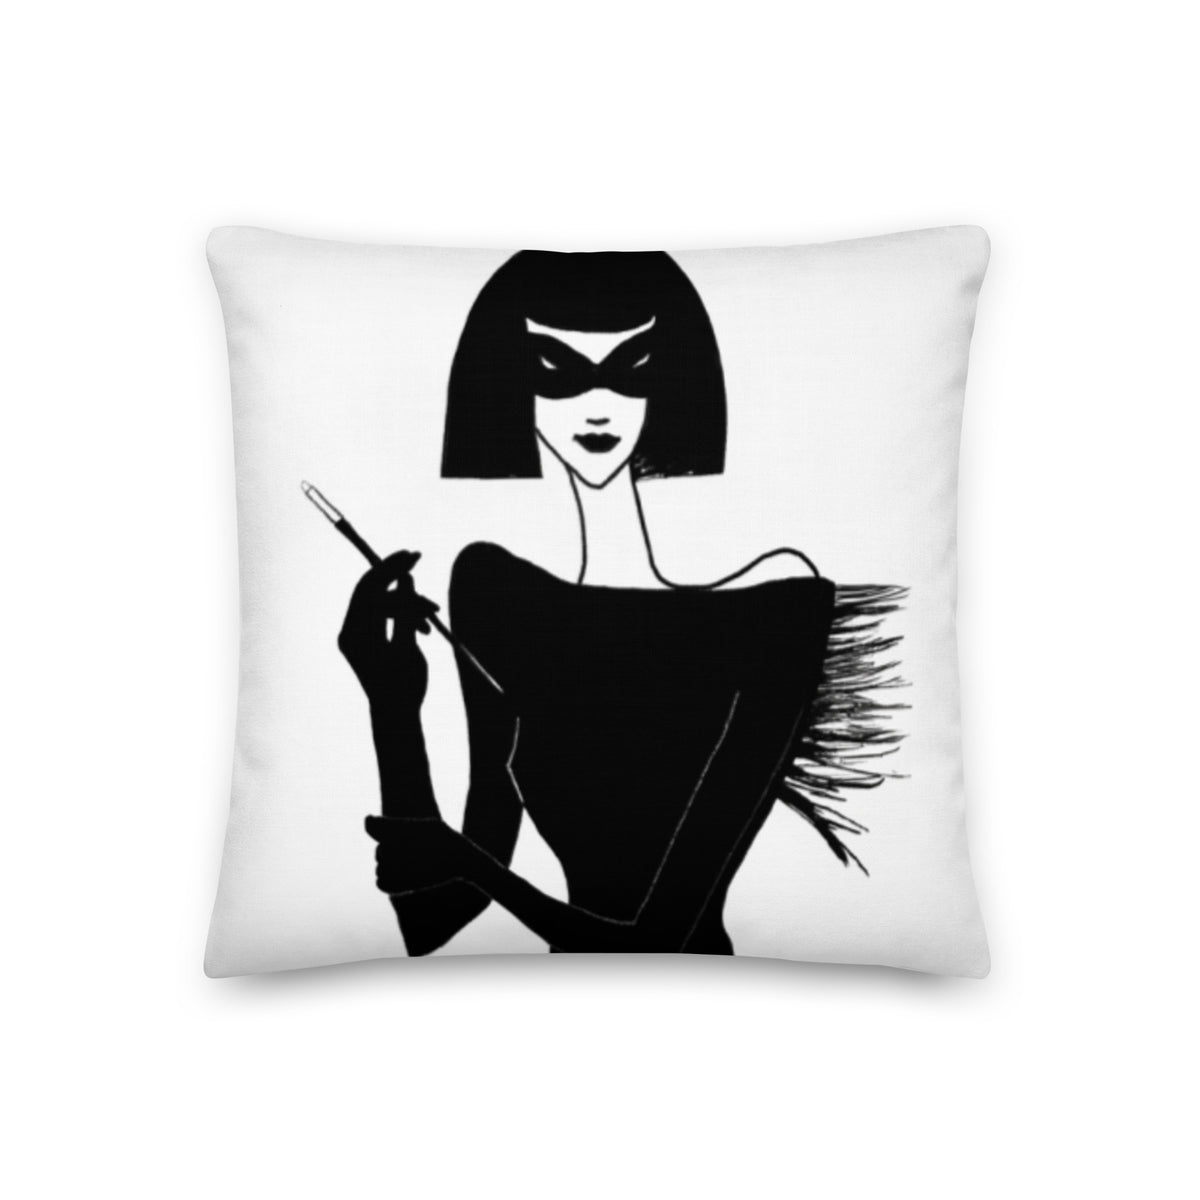 Premium Pillow with an ink drawing of a 1920's woman in a mask and holding a long cigarette